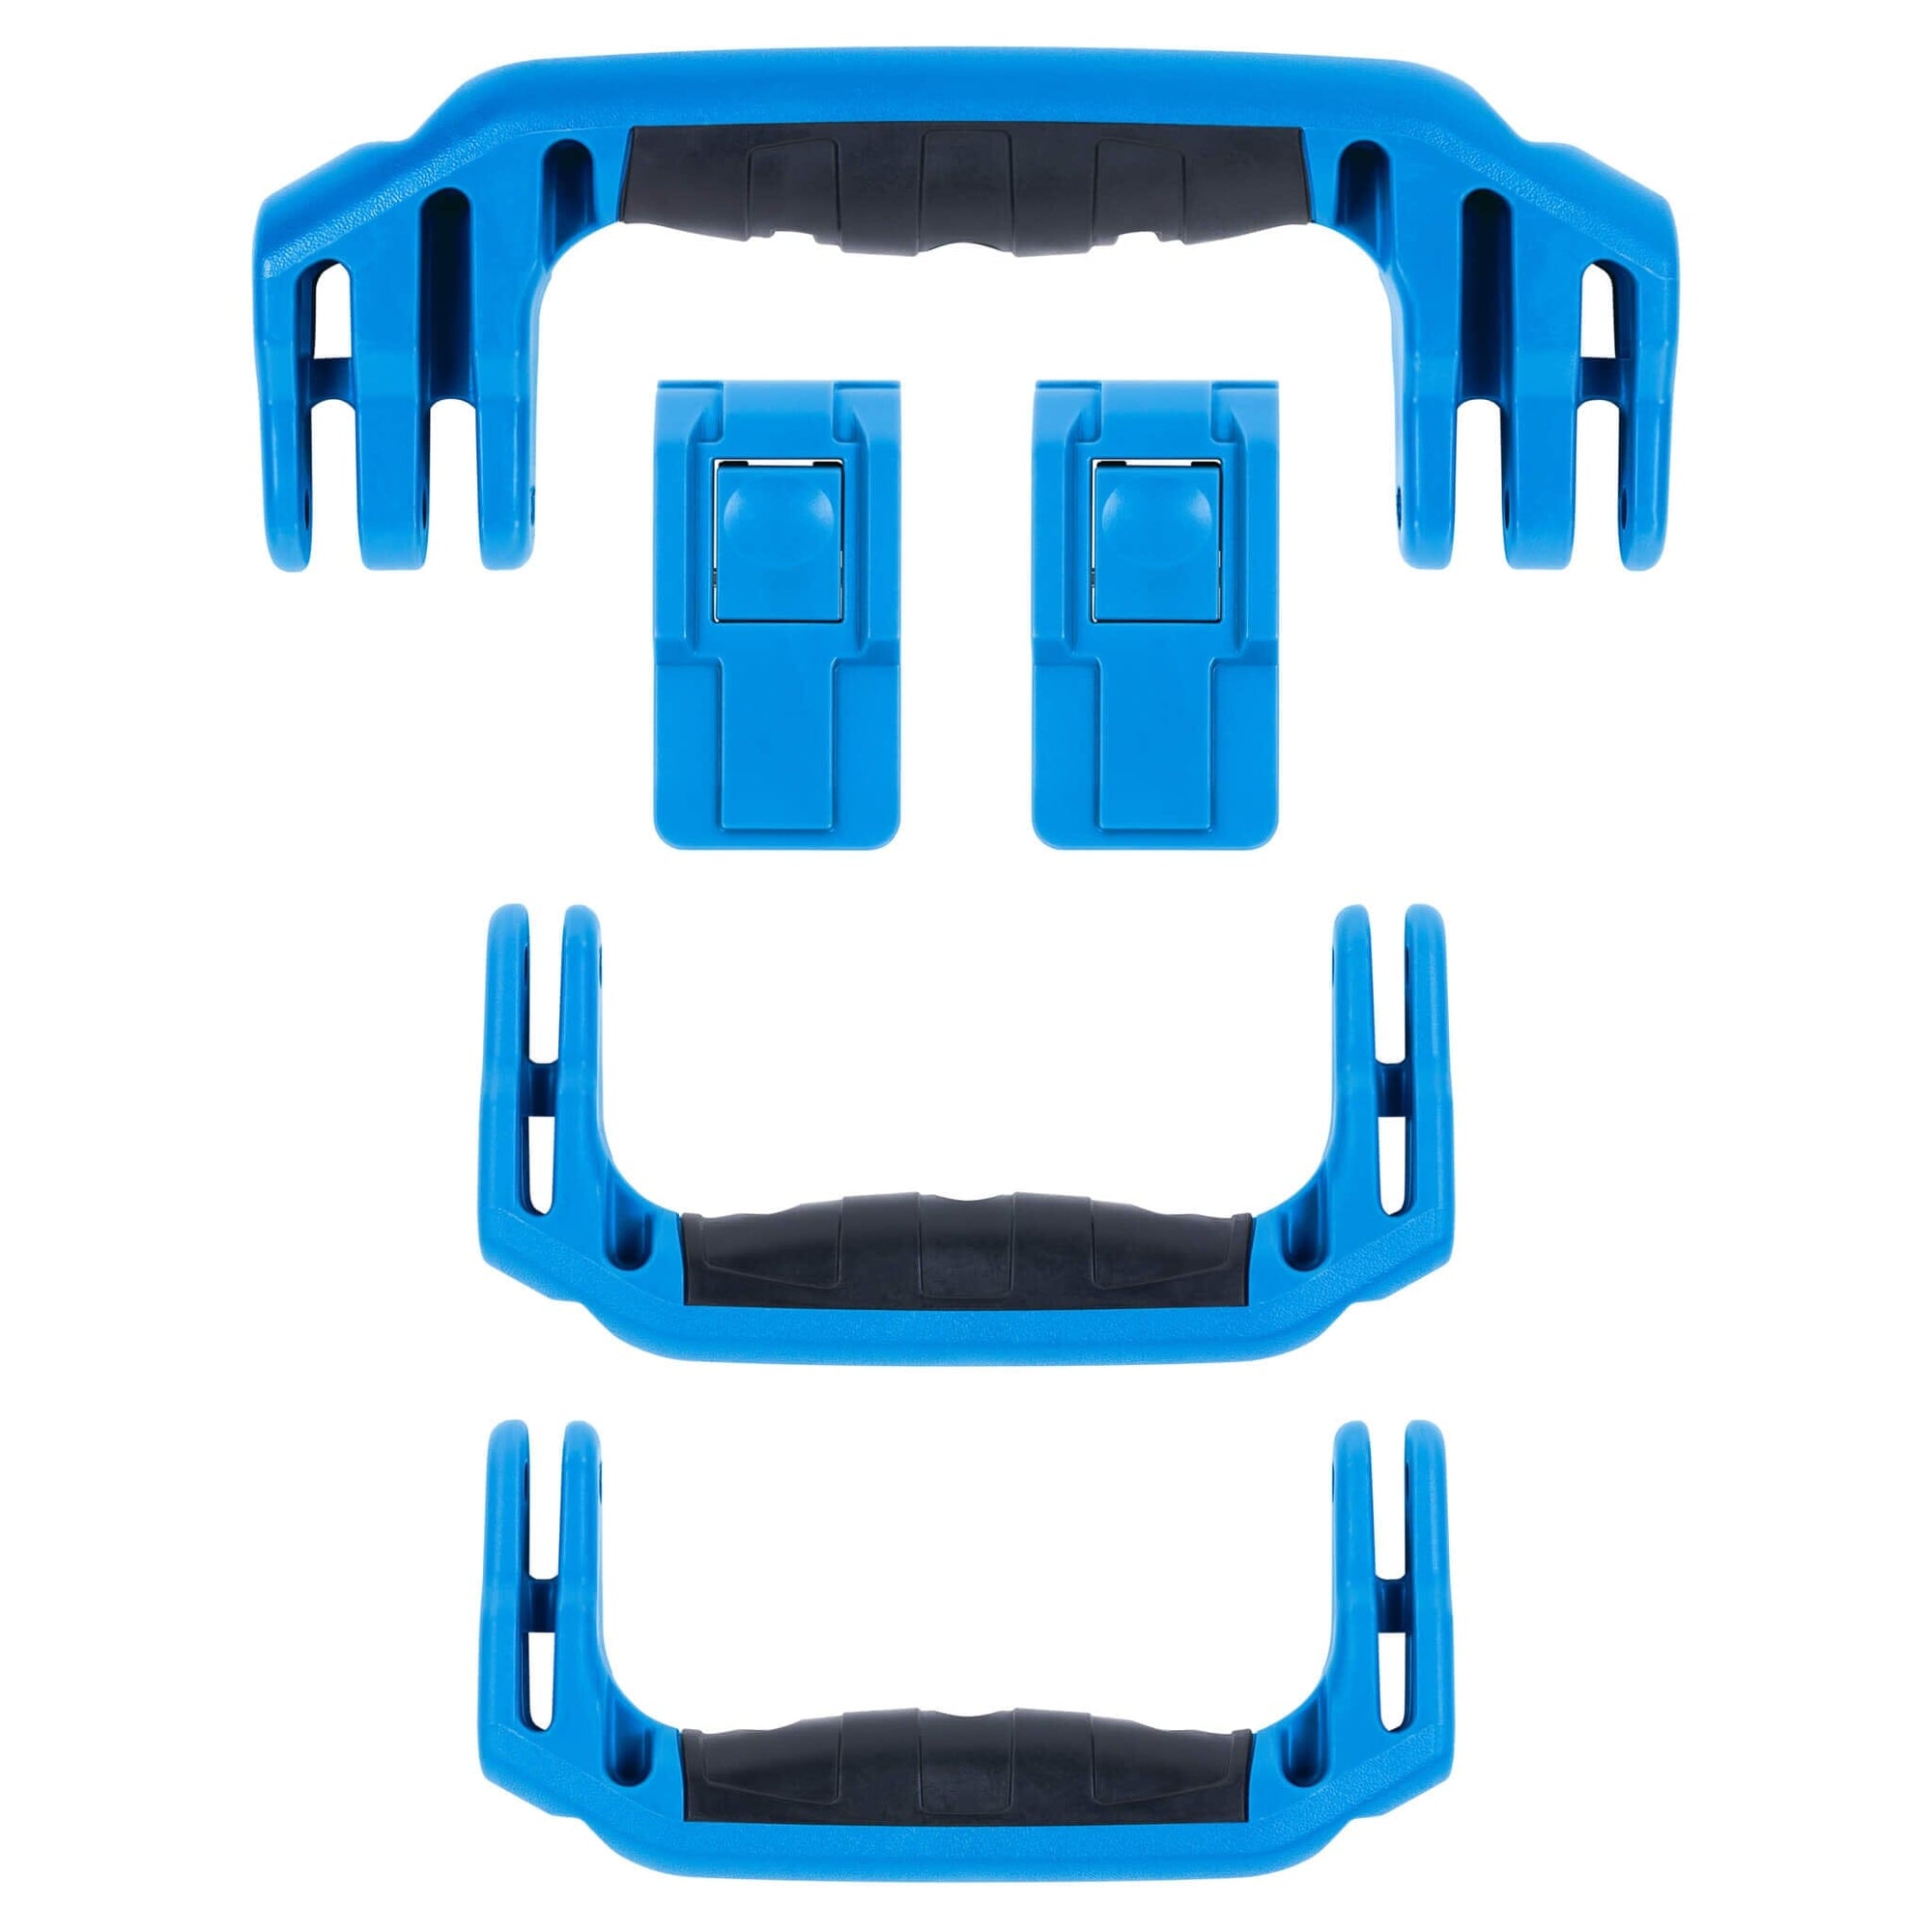 Pelican 1465 Air Replacement Handles & Latches, Blue (Set of 3 Handles, 2 Latches) ColorCase 